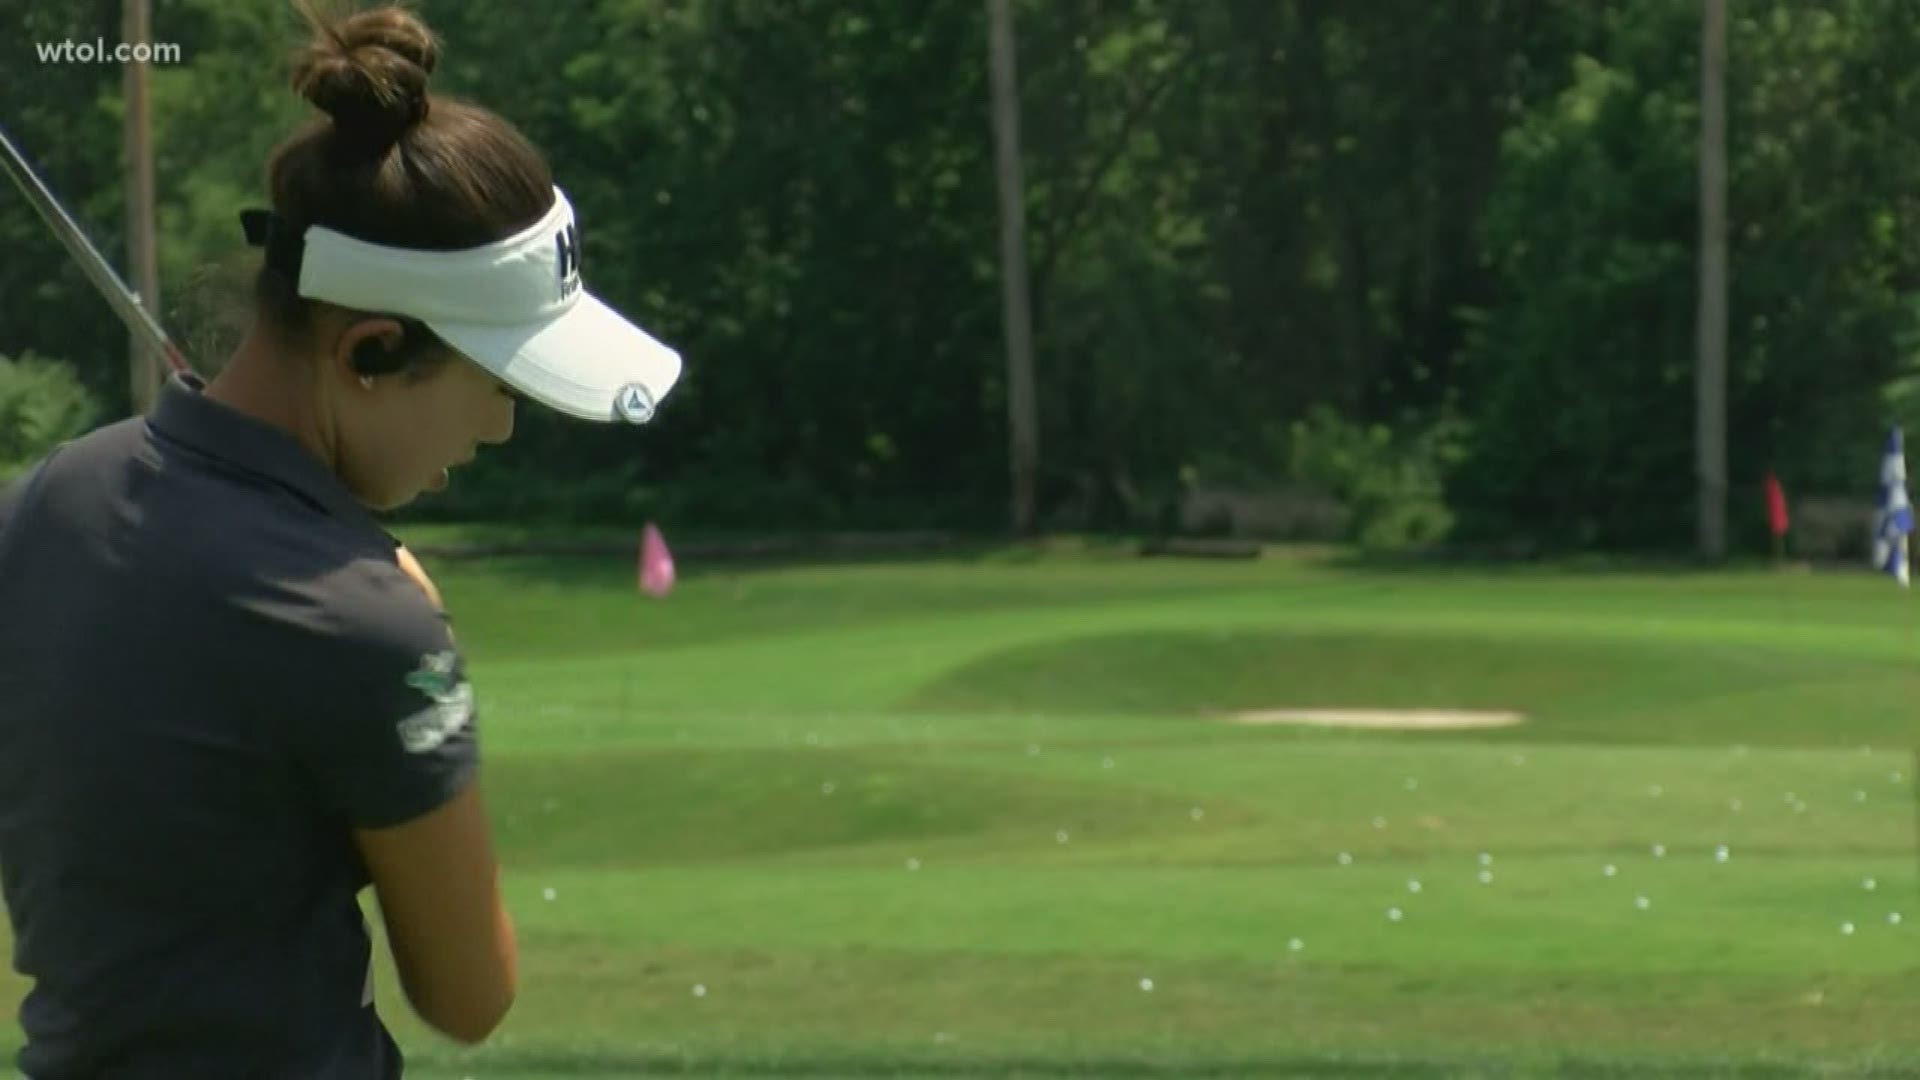 17-year-old Yealimi Noh turned professional and is playing in her fourth tournament this week at the Marathon Classic.